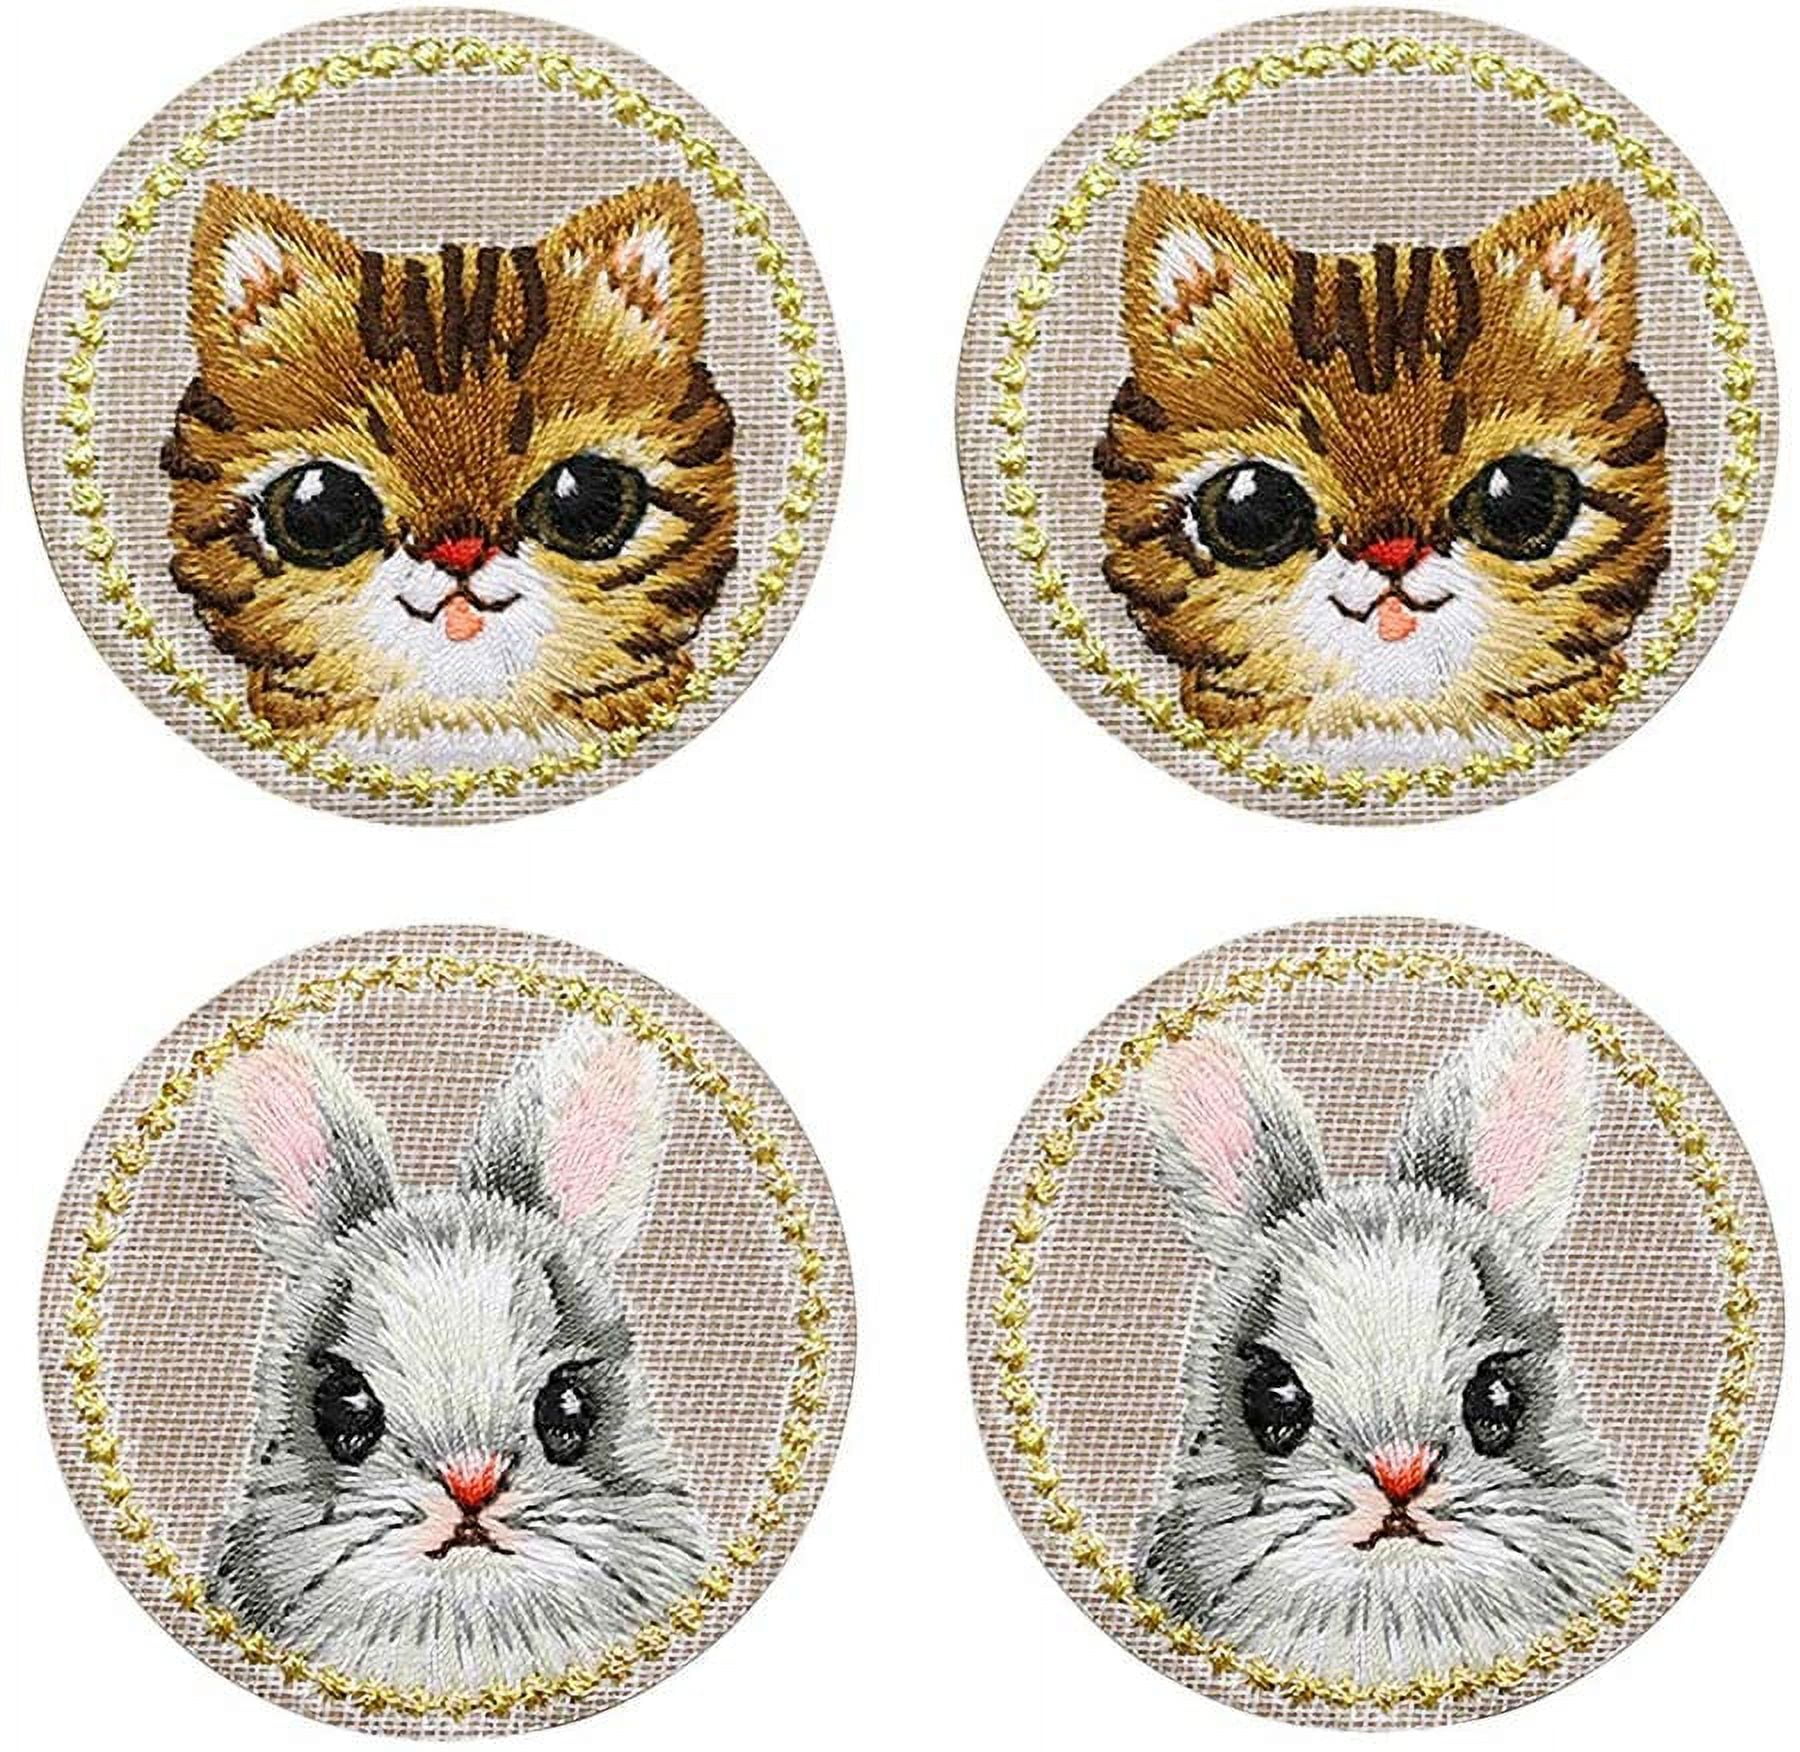 Embroidery Patches,Cute Cat Iron On DIY Decorative Applique Stickers for  Clothing Jeans Bag Jackets Socks Shoes (15pcs)